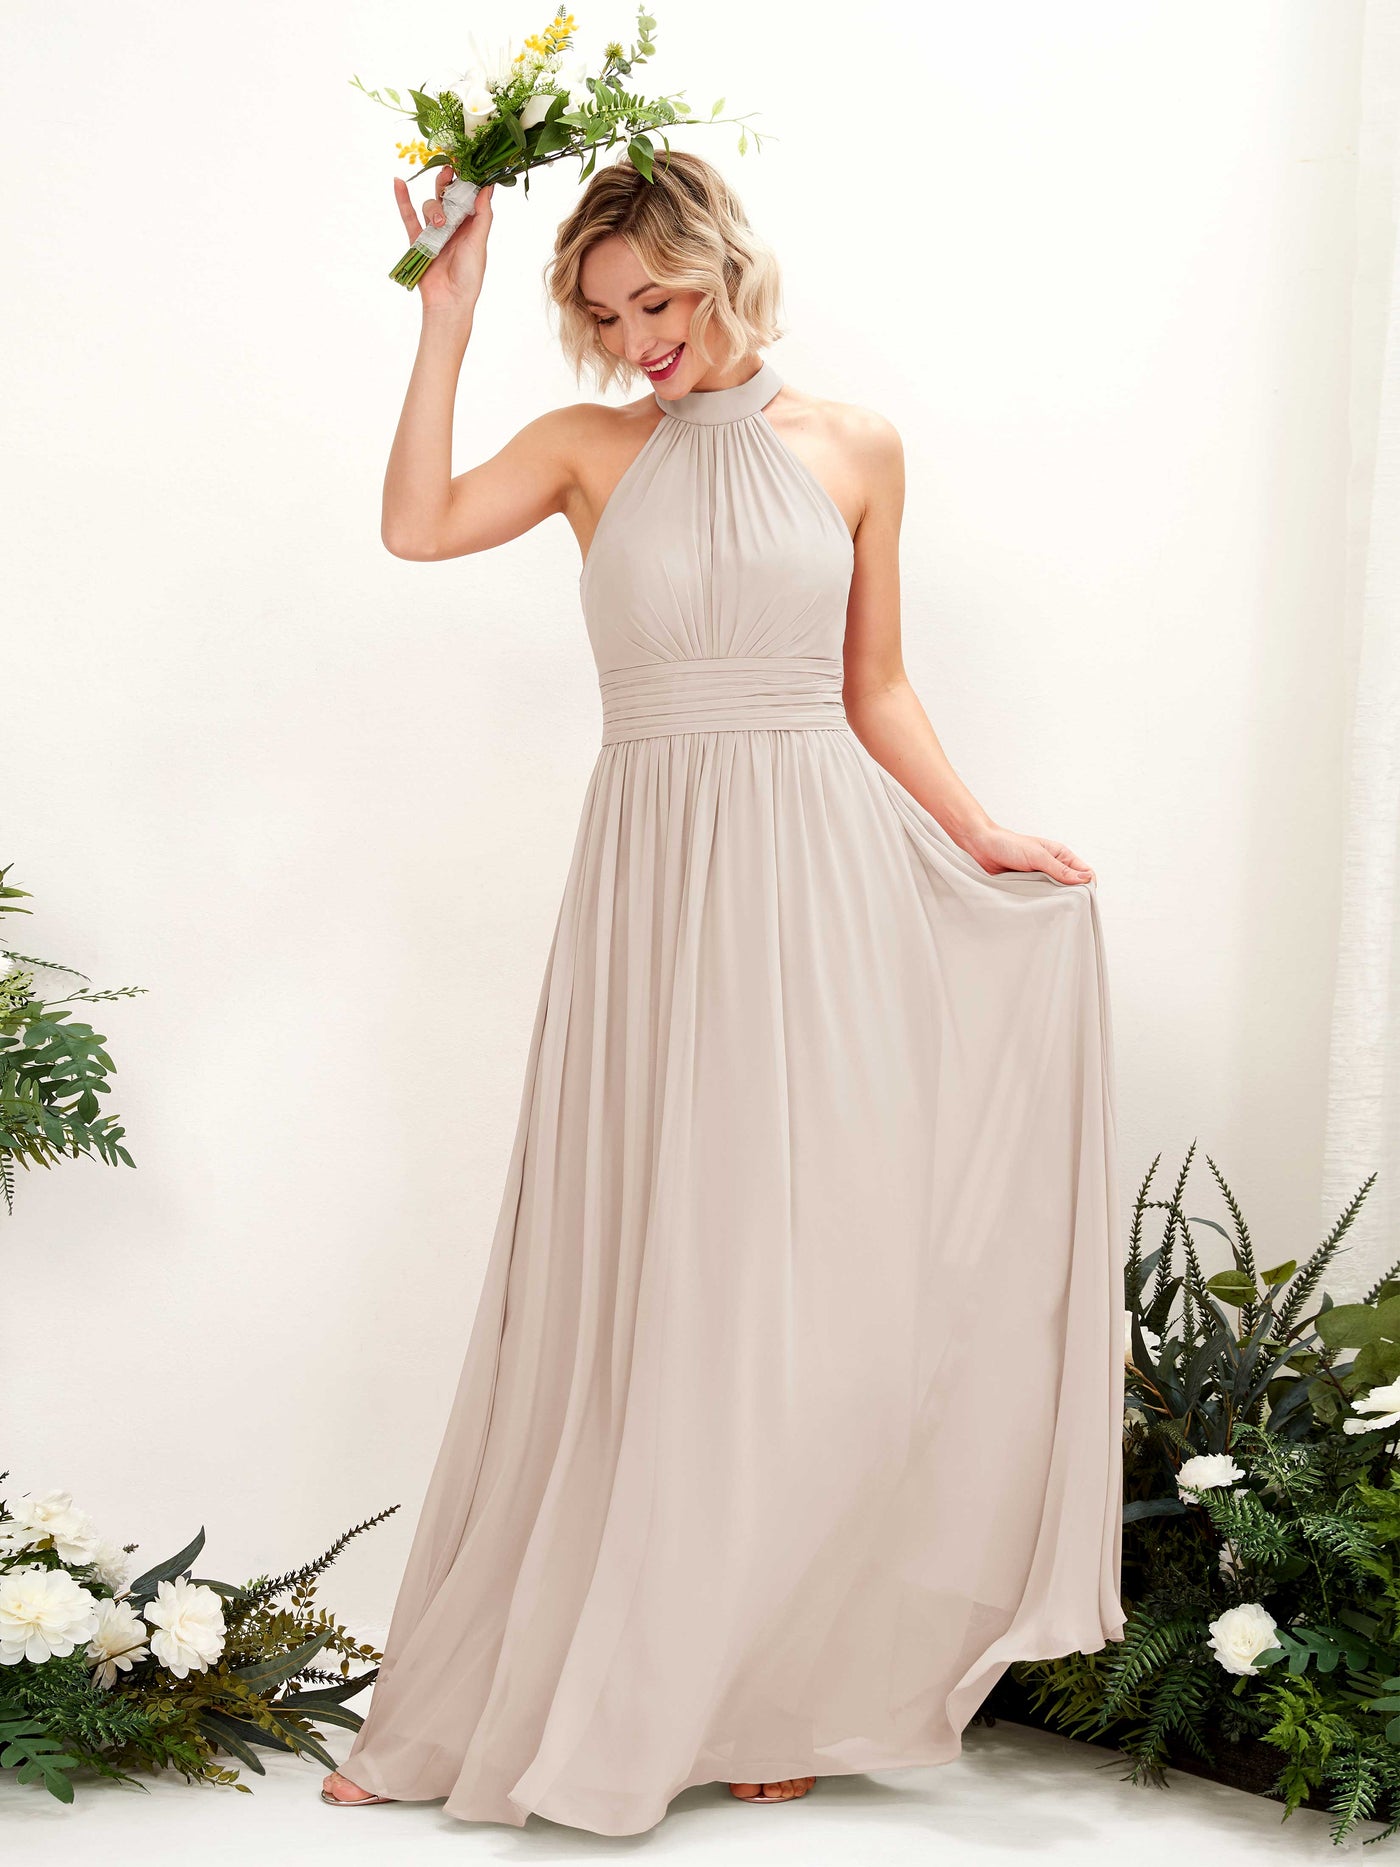 Champagne Bridesmaid Dresses Bridesmaid Dress A-line Chiffon Halter Full Length Sleeveless Wedding Party Dress (81225316)#color_champagne